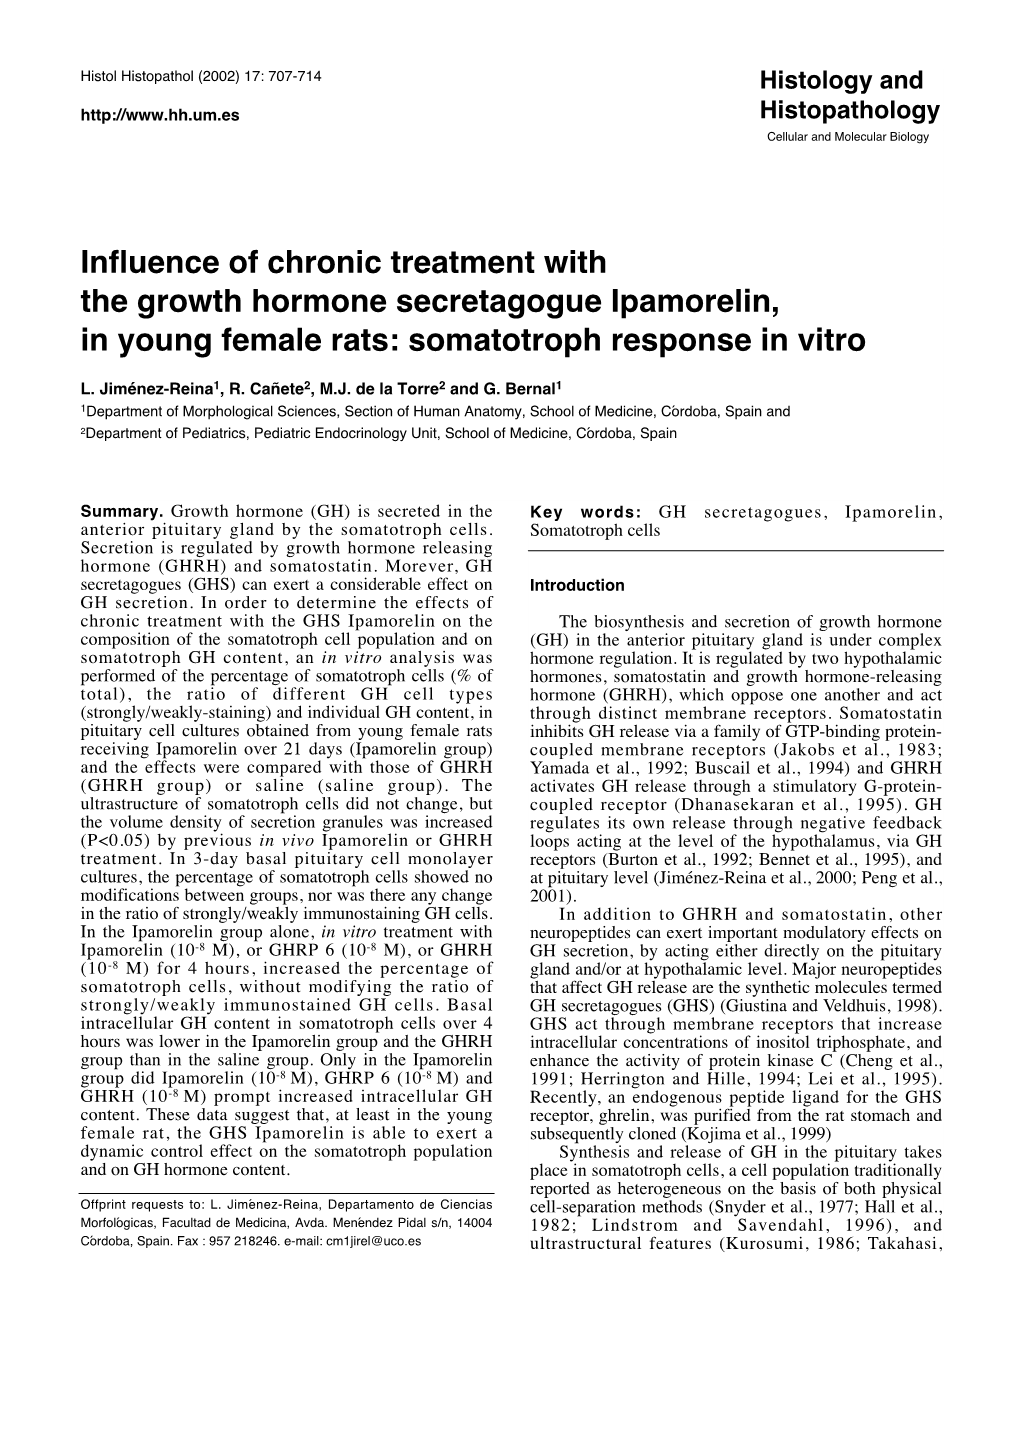 Influence of Chronic Treatment with the Growth Hormone Secretagogue Ipamorelin, in Young Female Rats: Somatotroph Response in Vitro